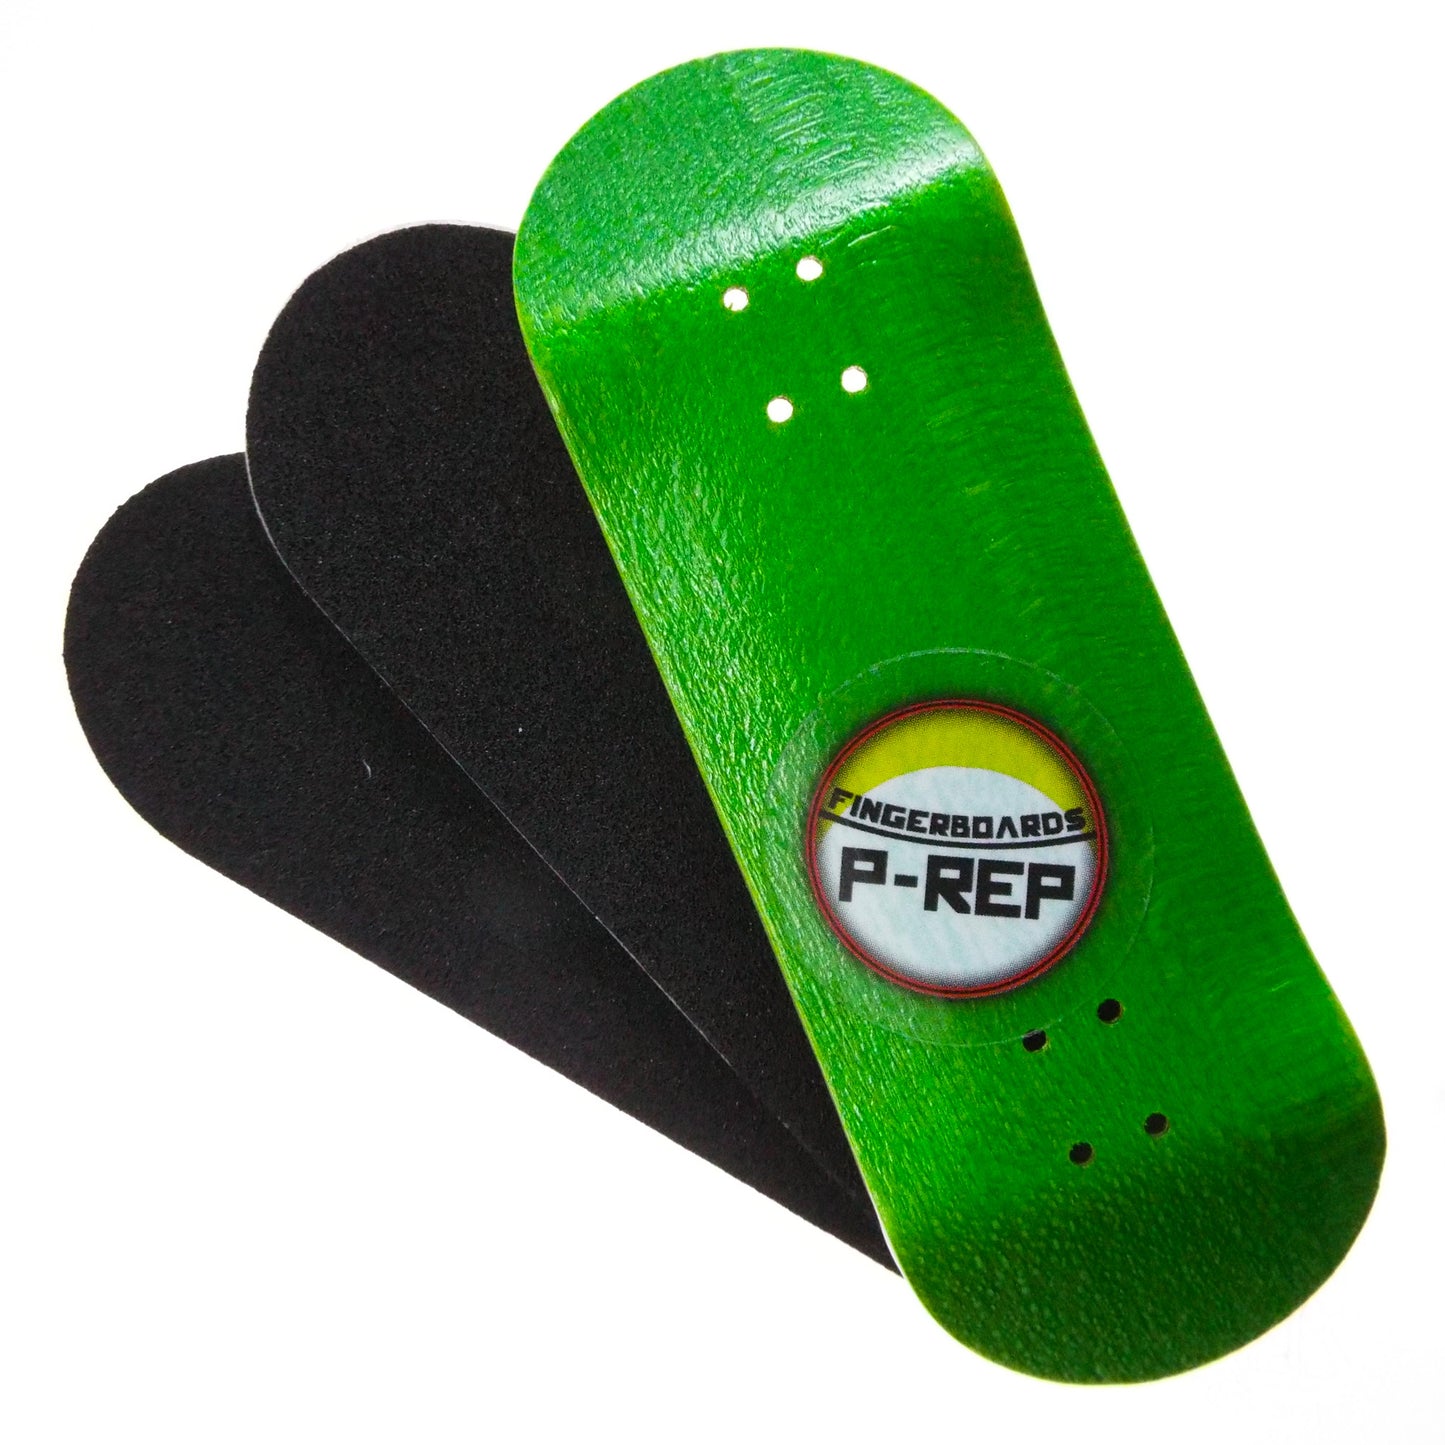 P-REP  32mm x 97mm V2 Performance Complete - Green